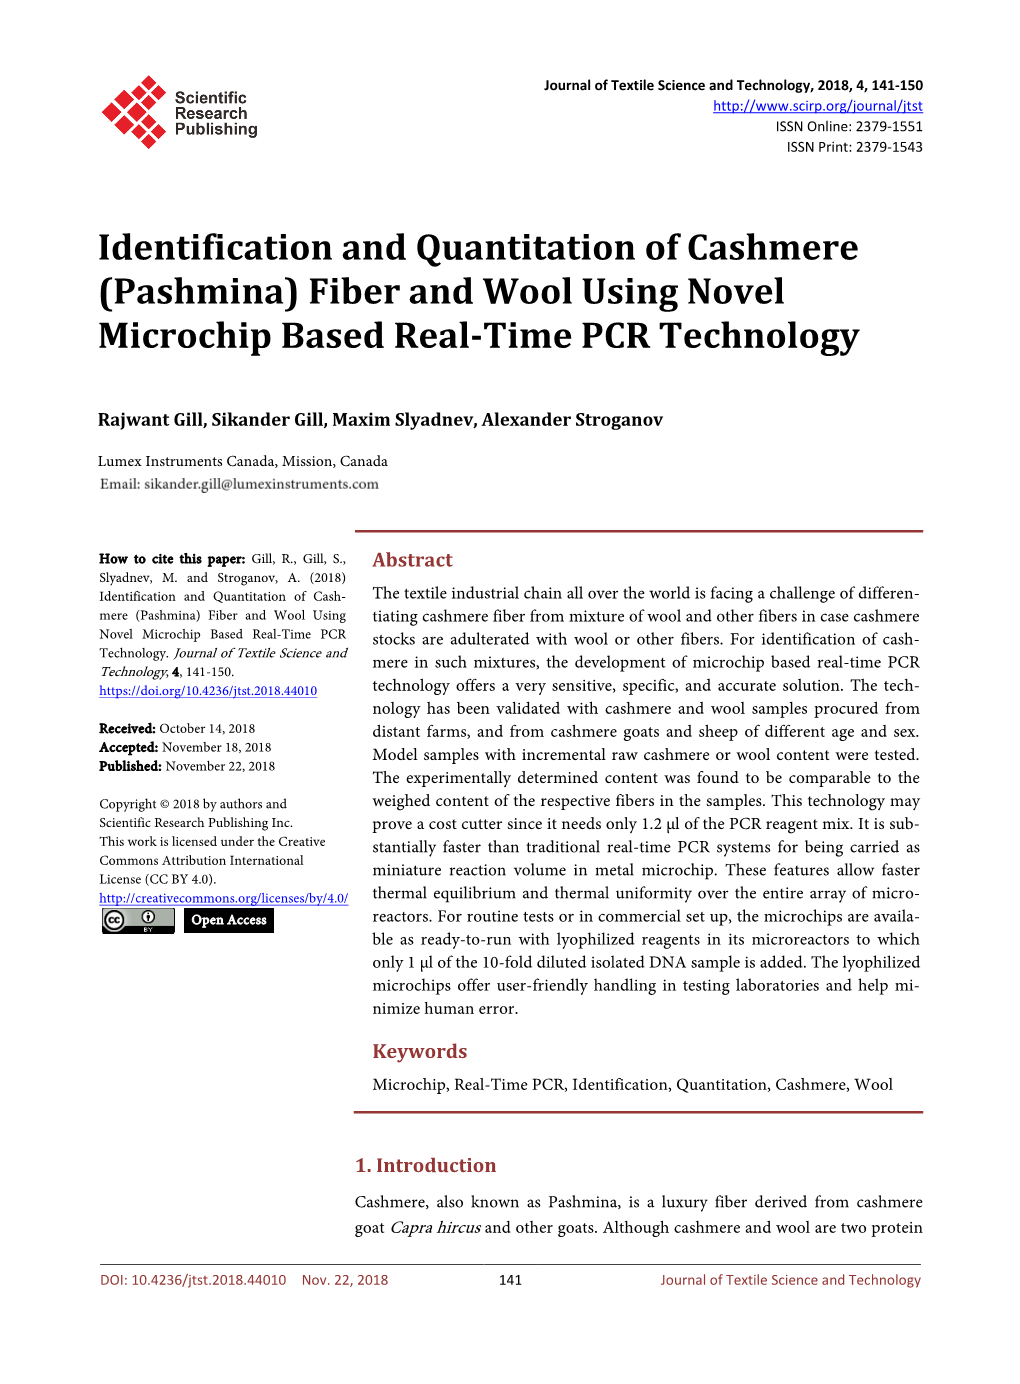 Identification and Quantitation of Cashmere (Pashmina) Fiber and Wool Using Novel Microchip Based Real-Time PCR Technology